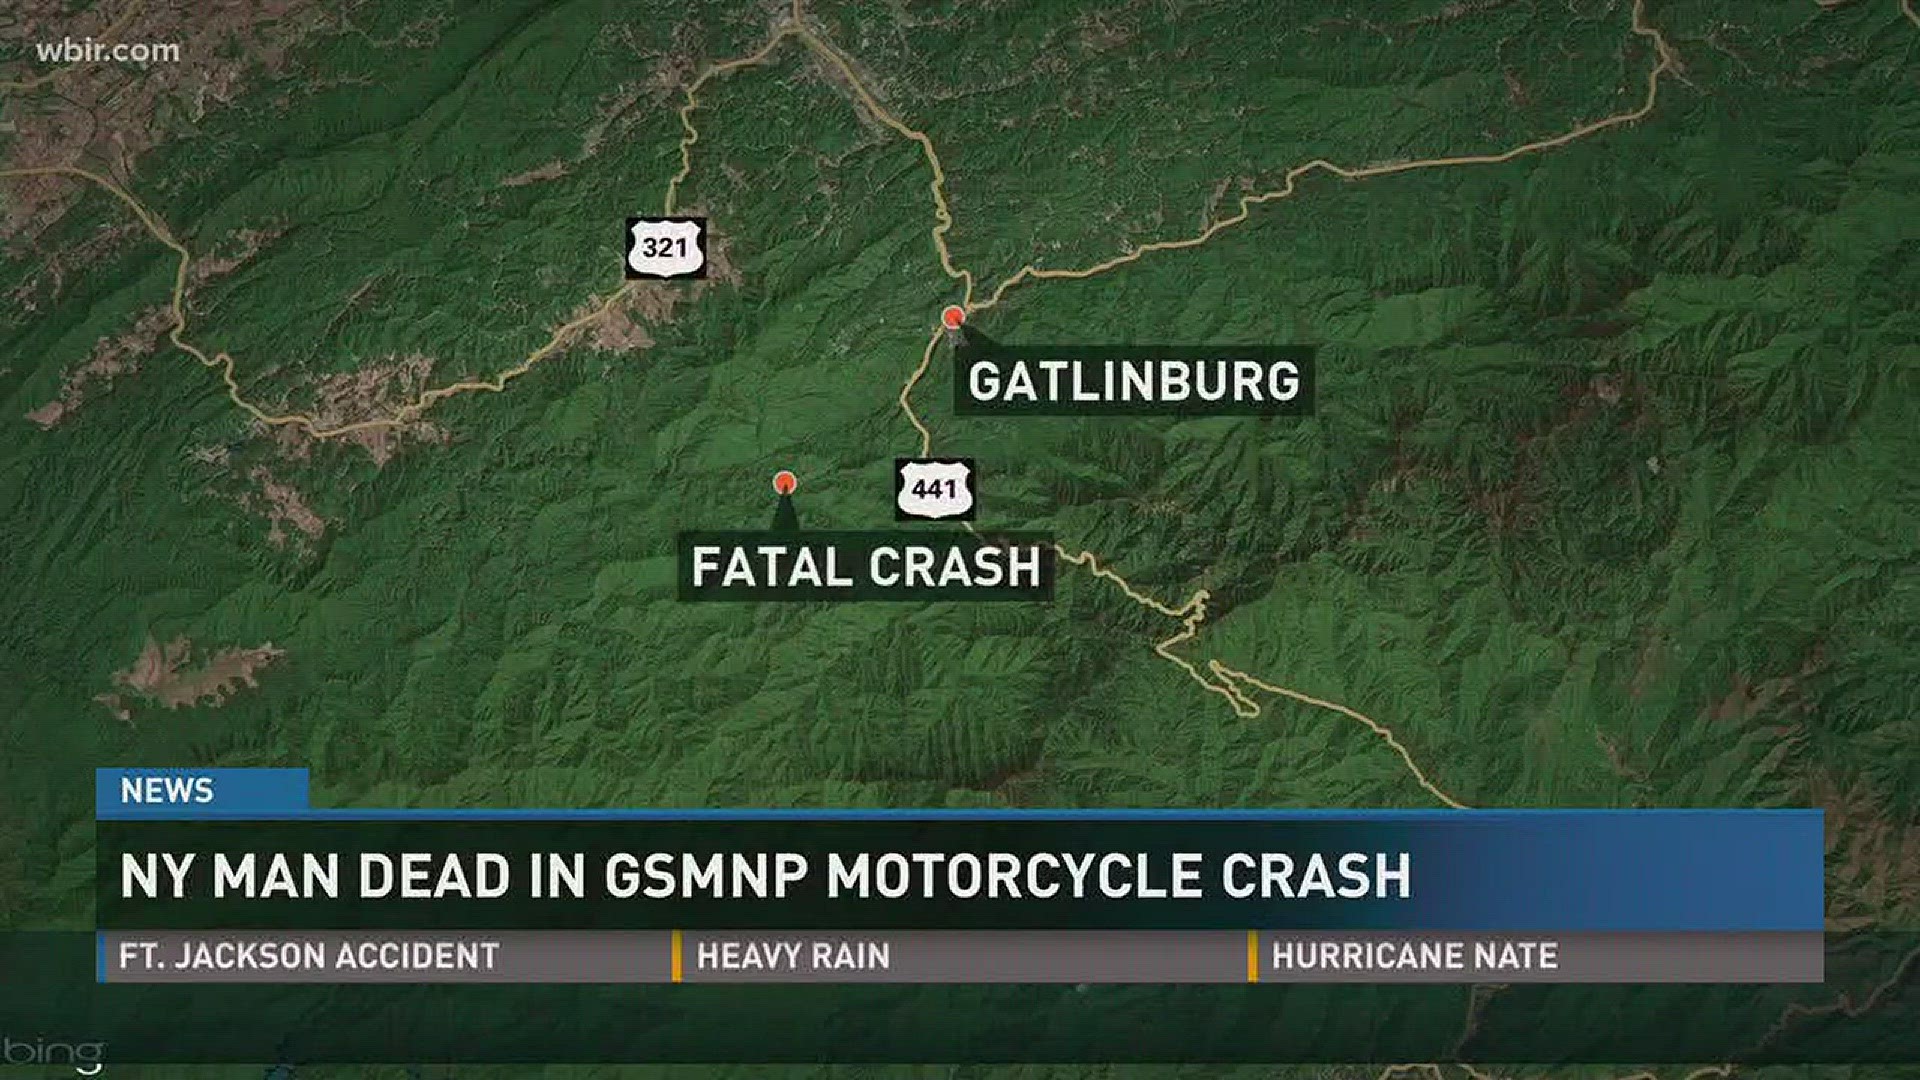 A New York man dies after motorcycle accident in Great Smoky Mountains.